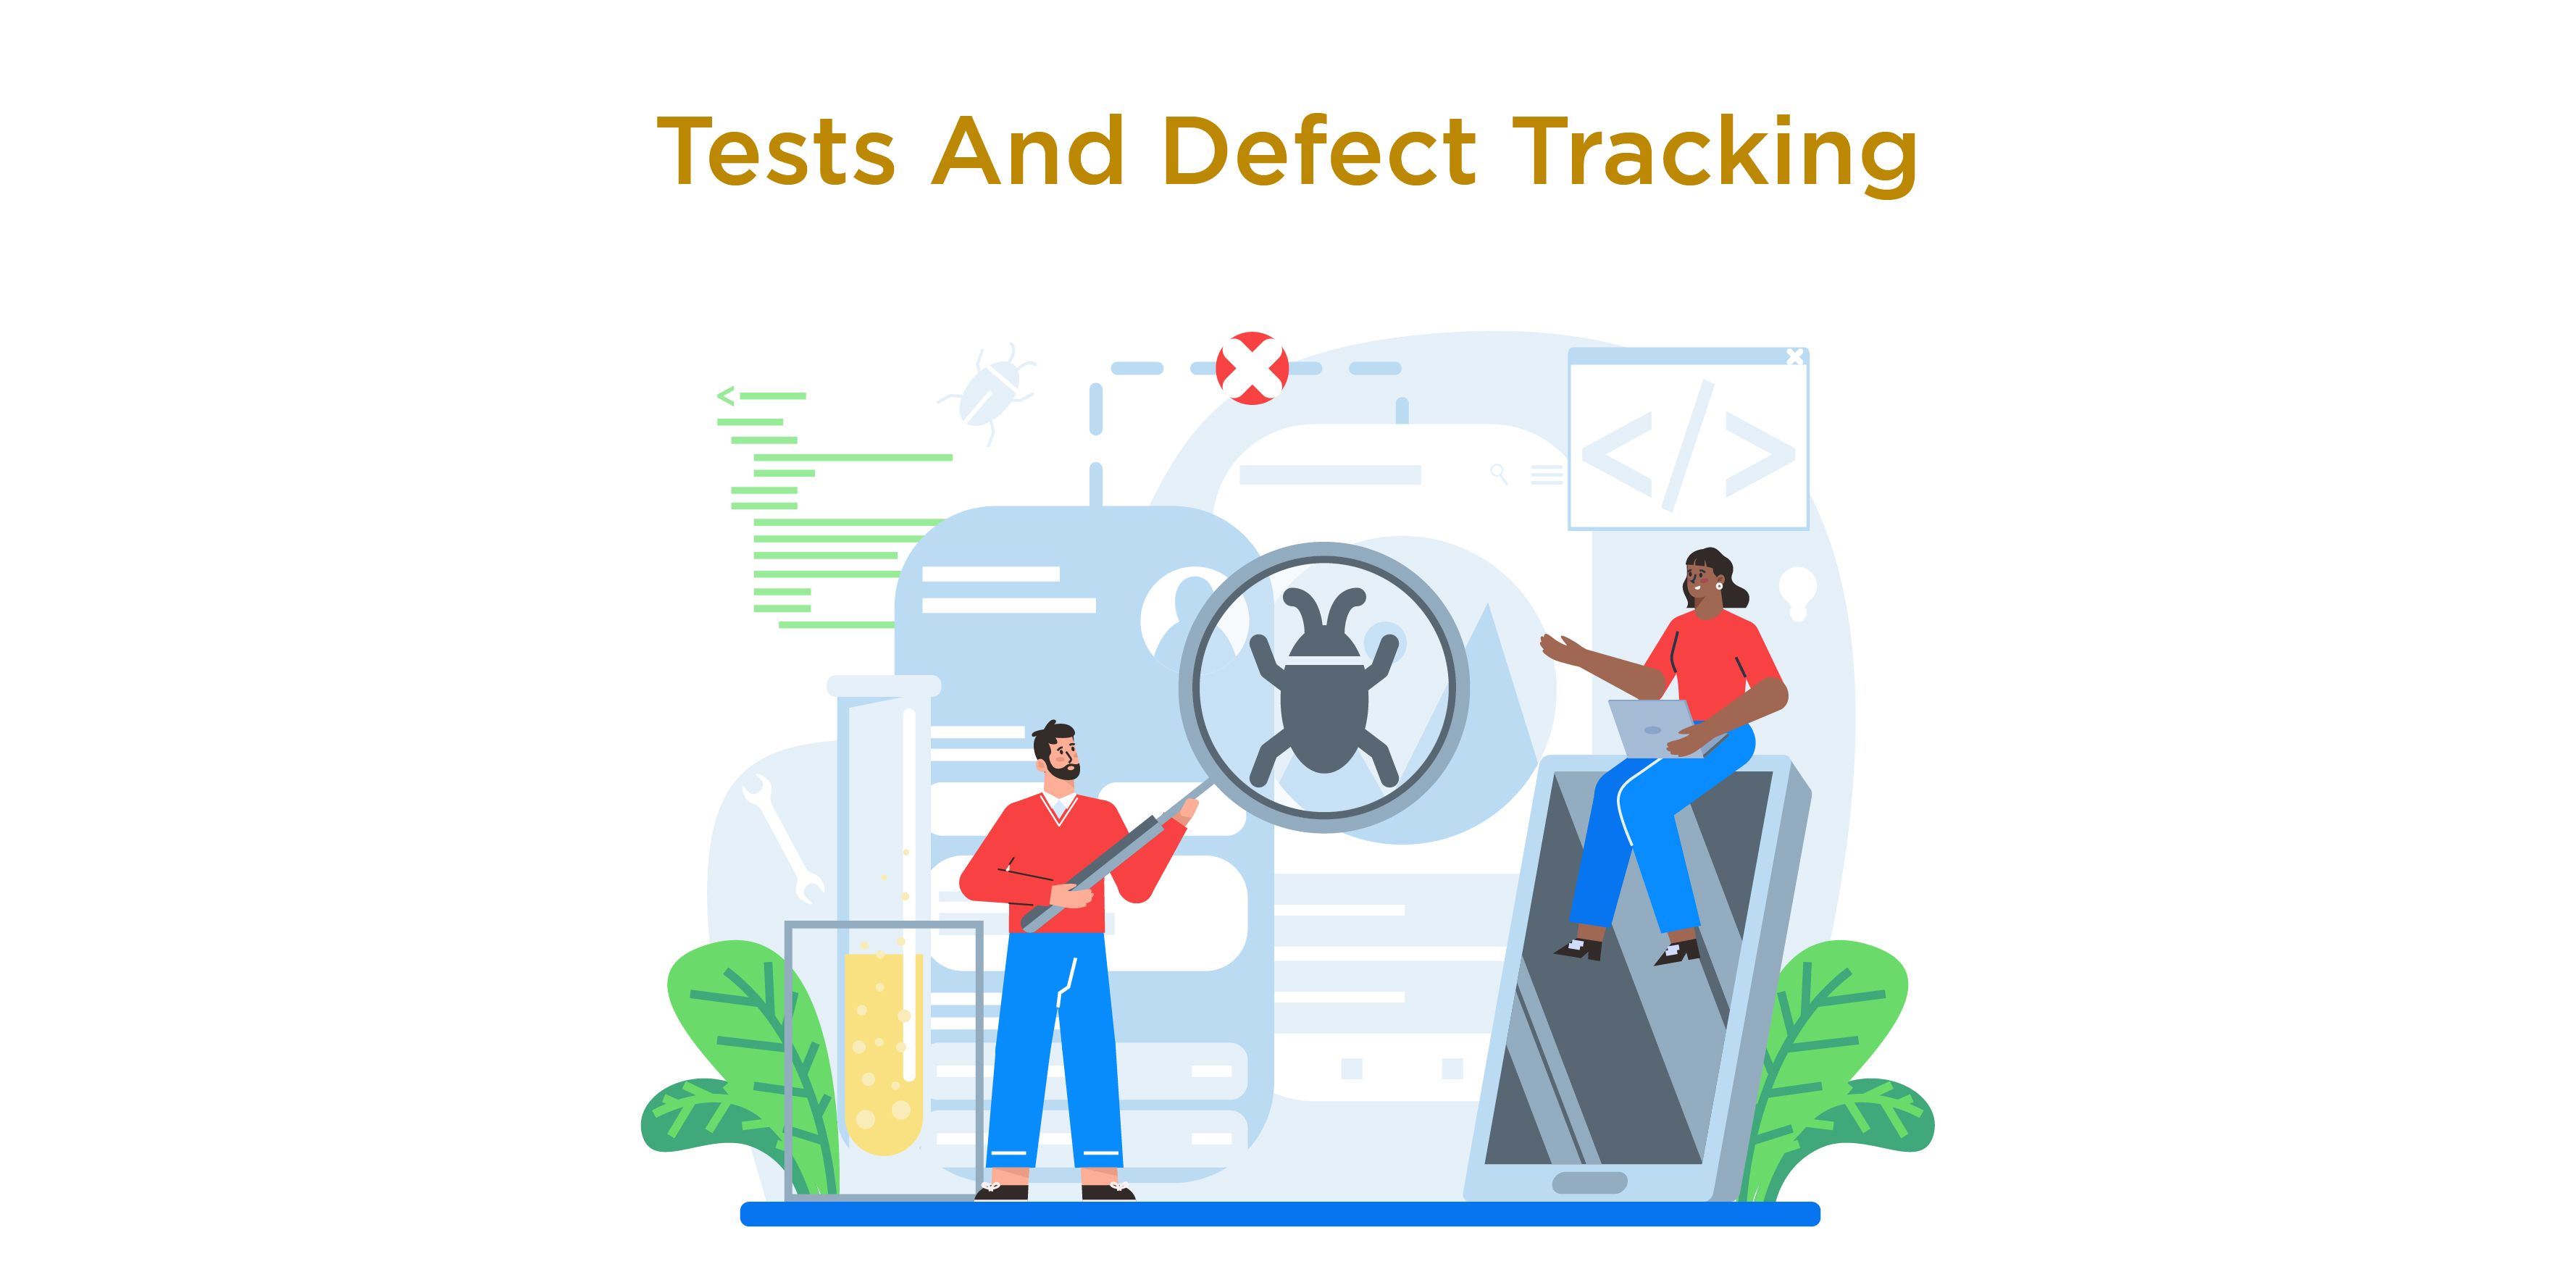 Administration Of Tests And Defect Tracking